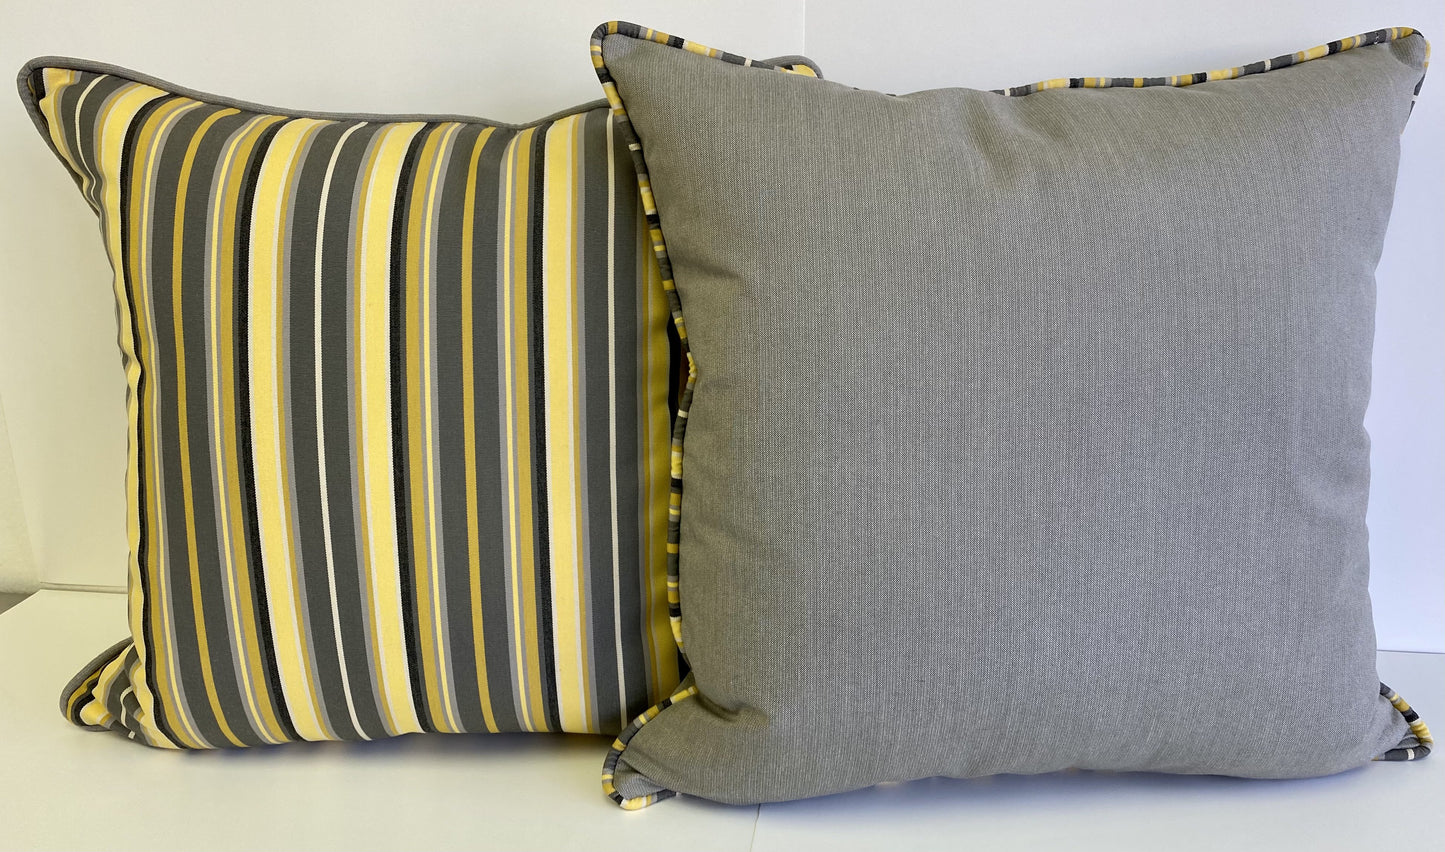 Luxury Outdoor Pillow - 22" x 22" - Seville Juice; Sunbrella, or equivalent, fabric with fiber fill